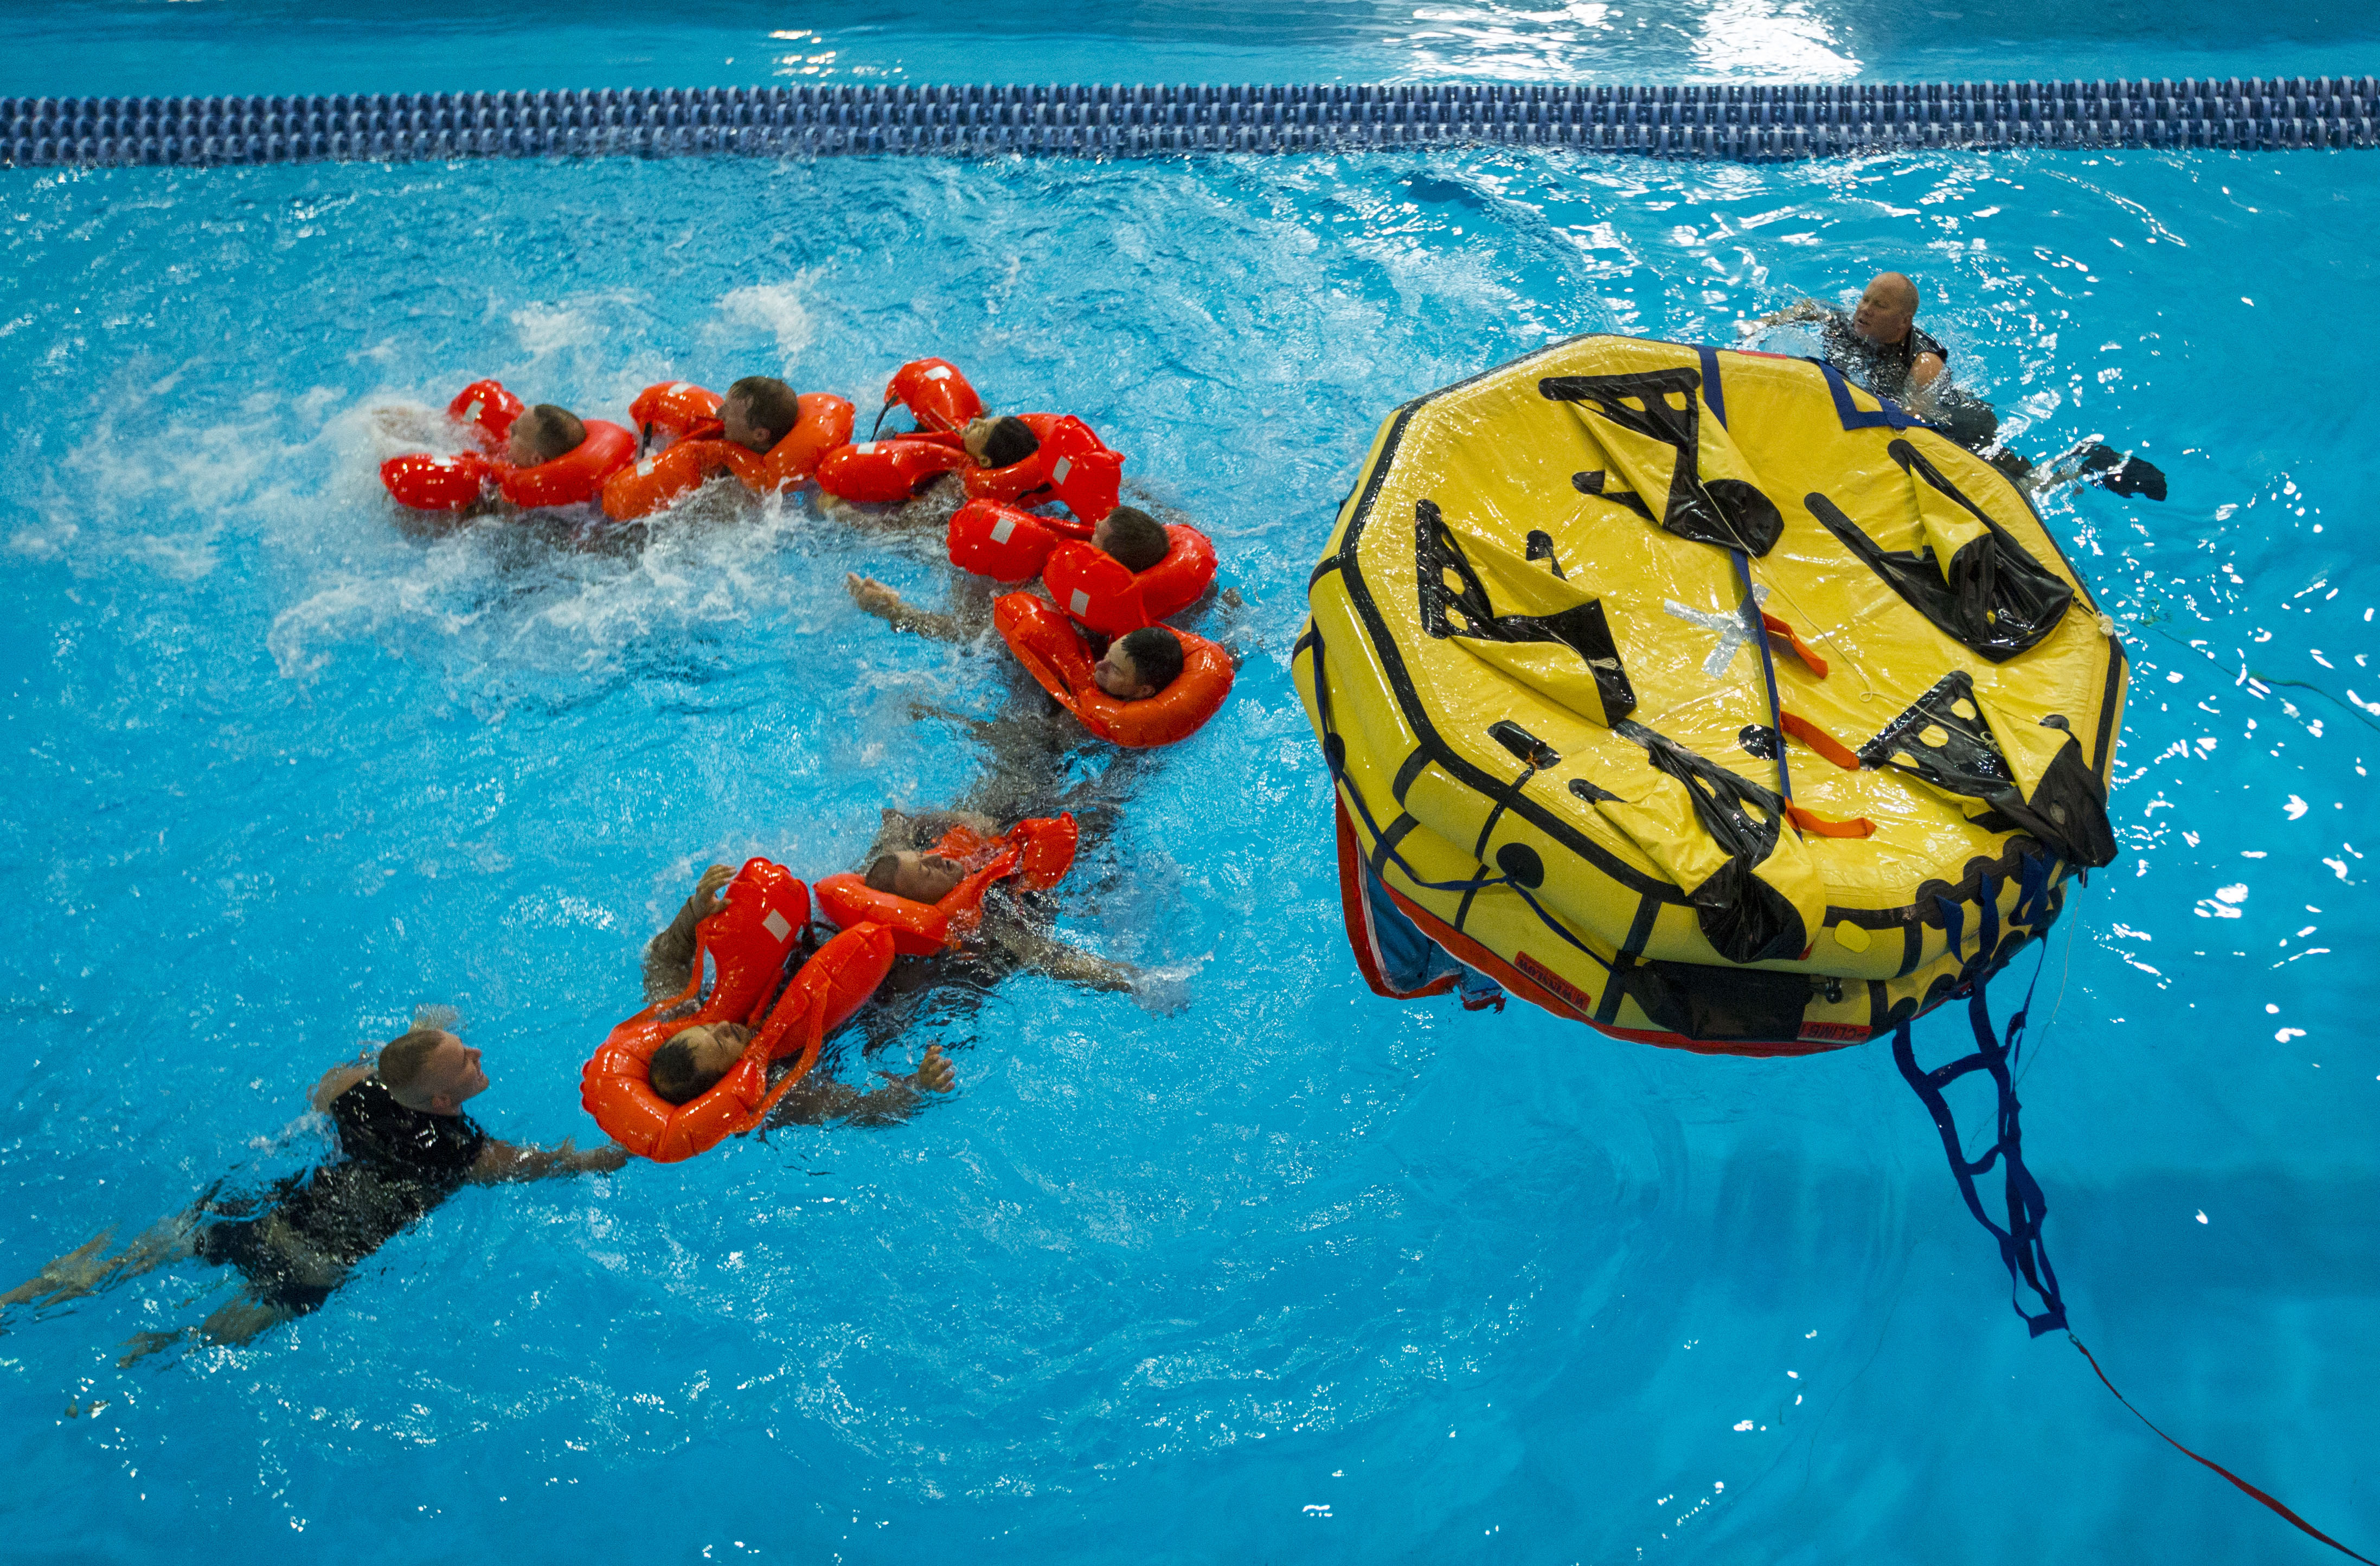 A human chain keeps survivors together, provides mobility and even warmth while moving through the water.